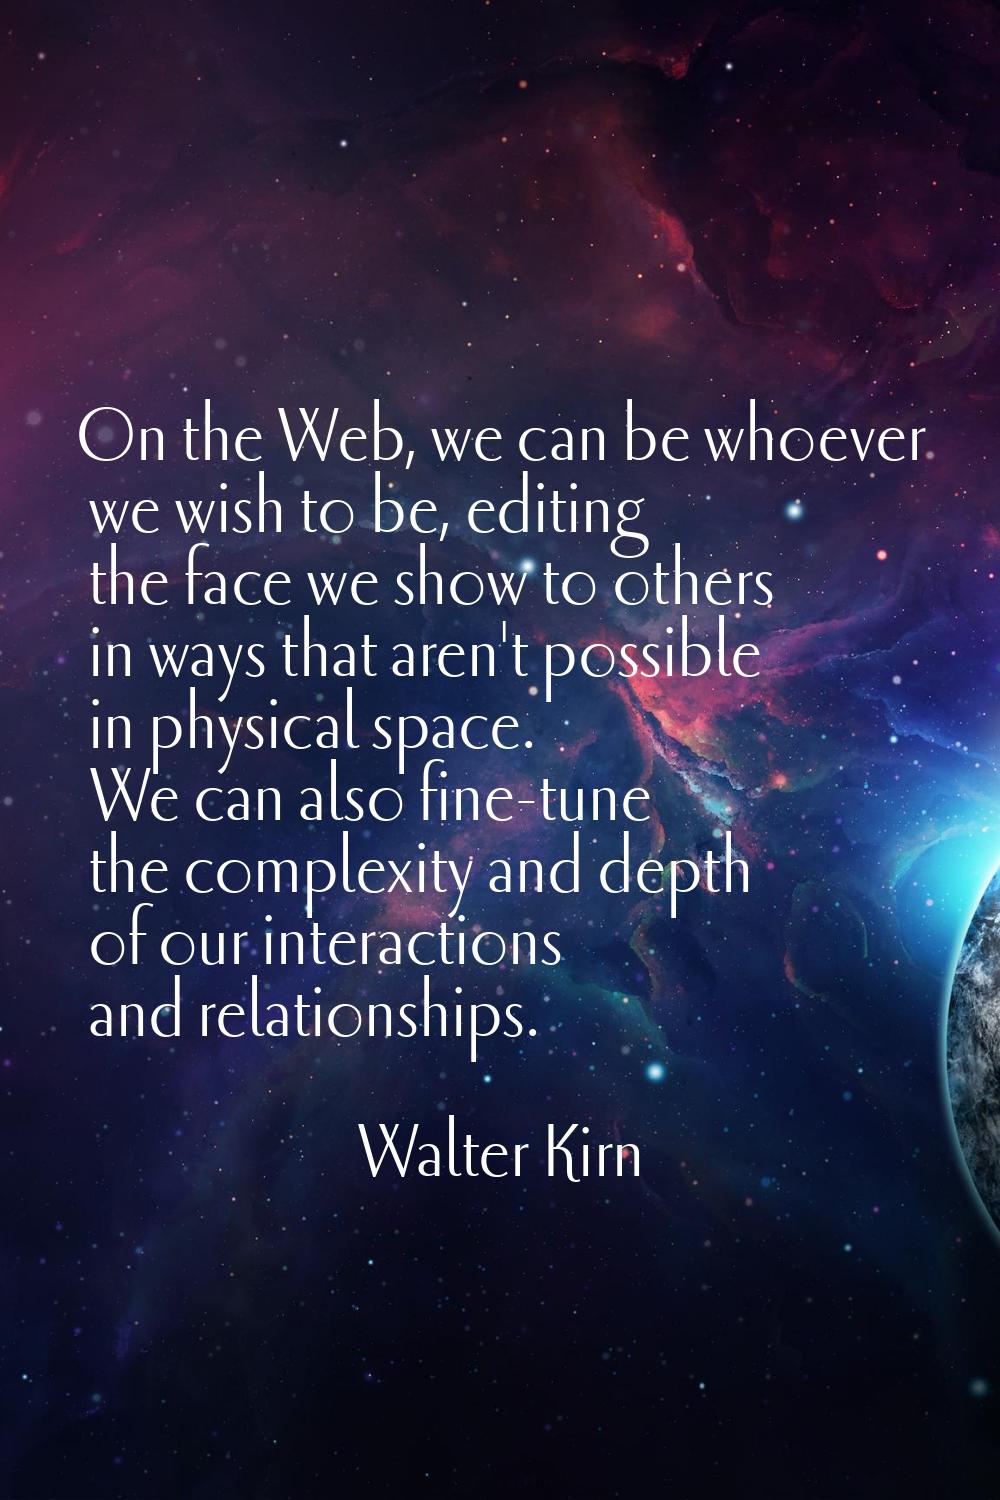 On the Web, we can be whoever we wish to be, editing the face we show to others in ways that aren't